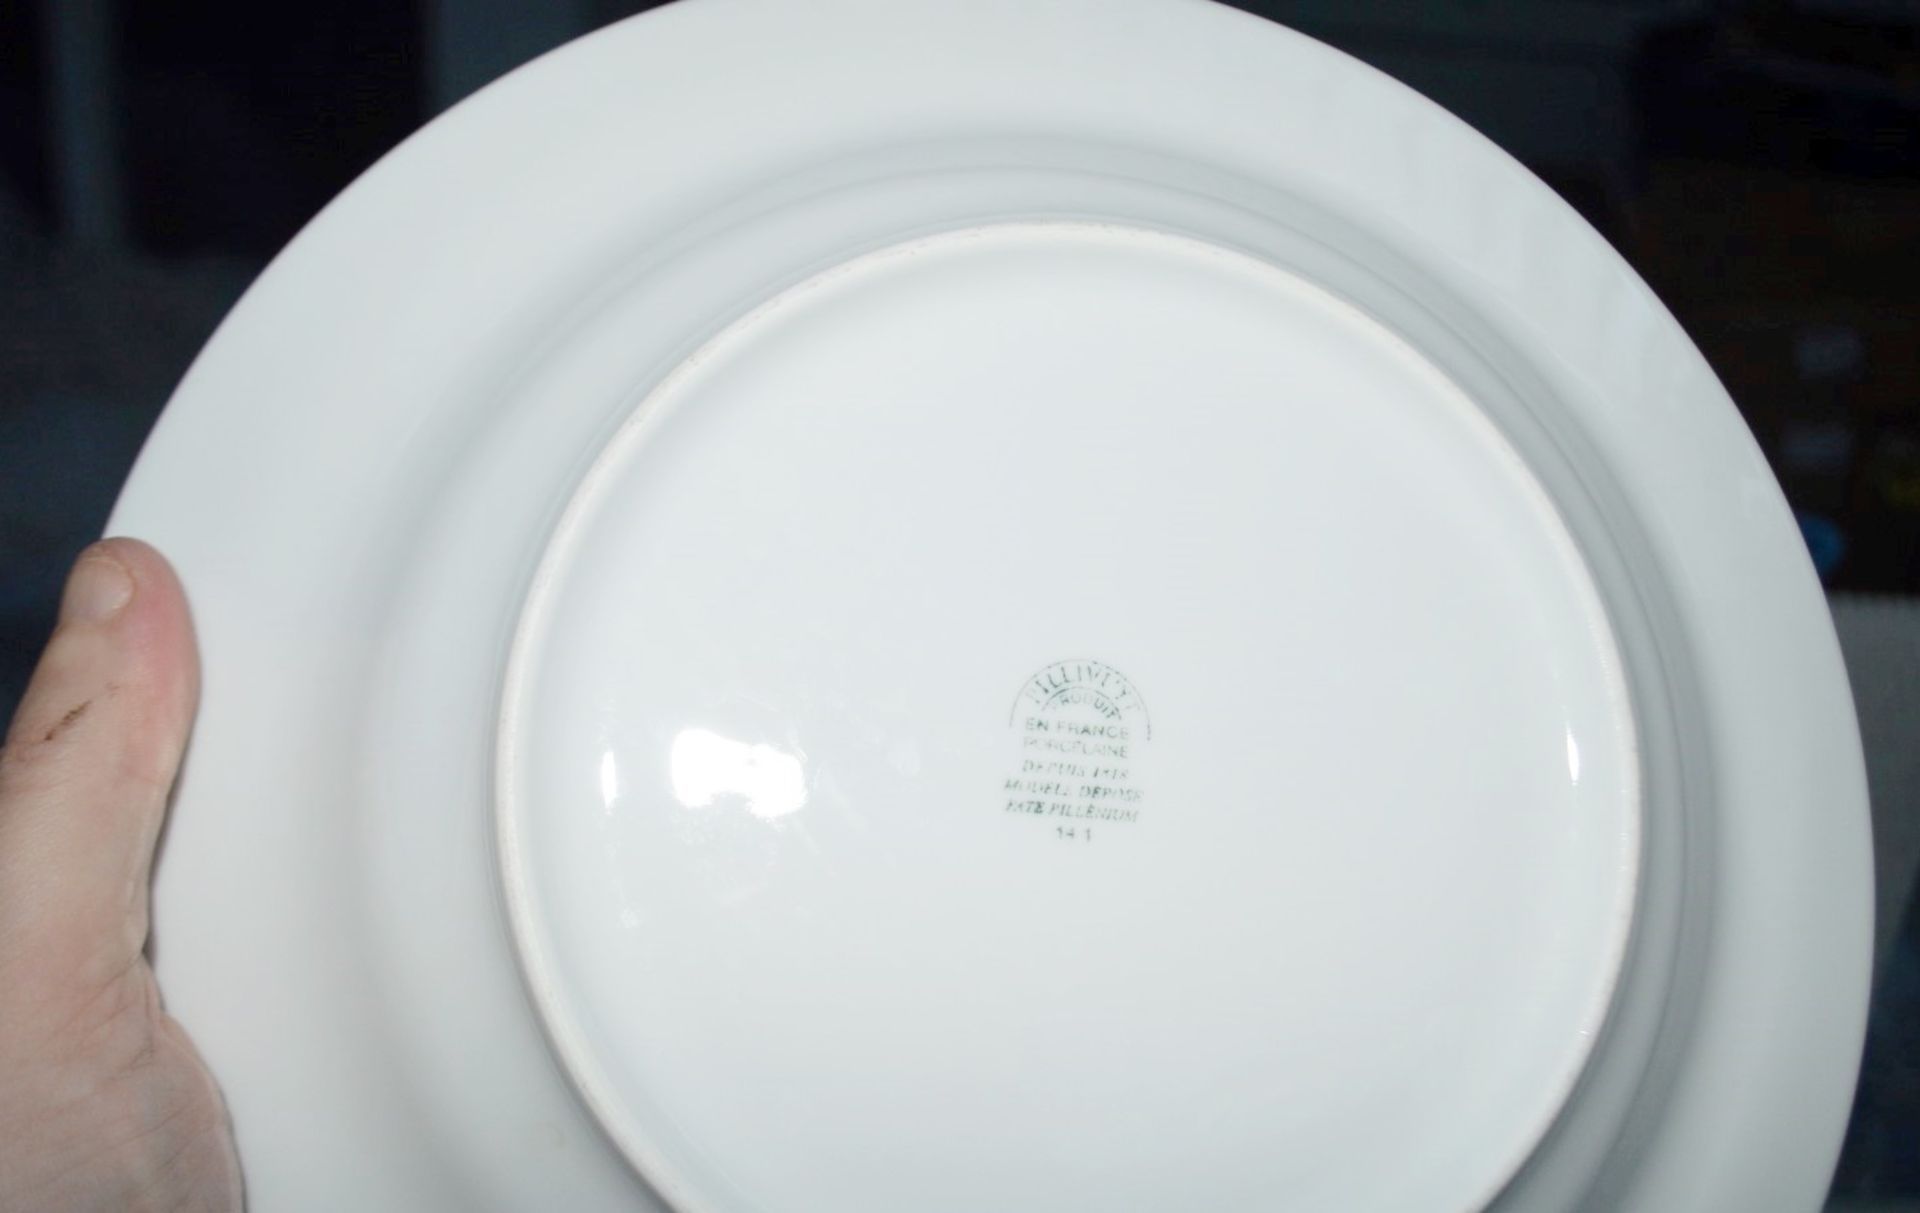 20 x PILLIVUYT Porcelain Pasta / Soup Plates In White Featuring 'Famous Branding' In Gold - - Image 2 of 6